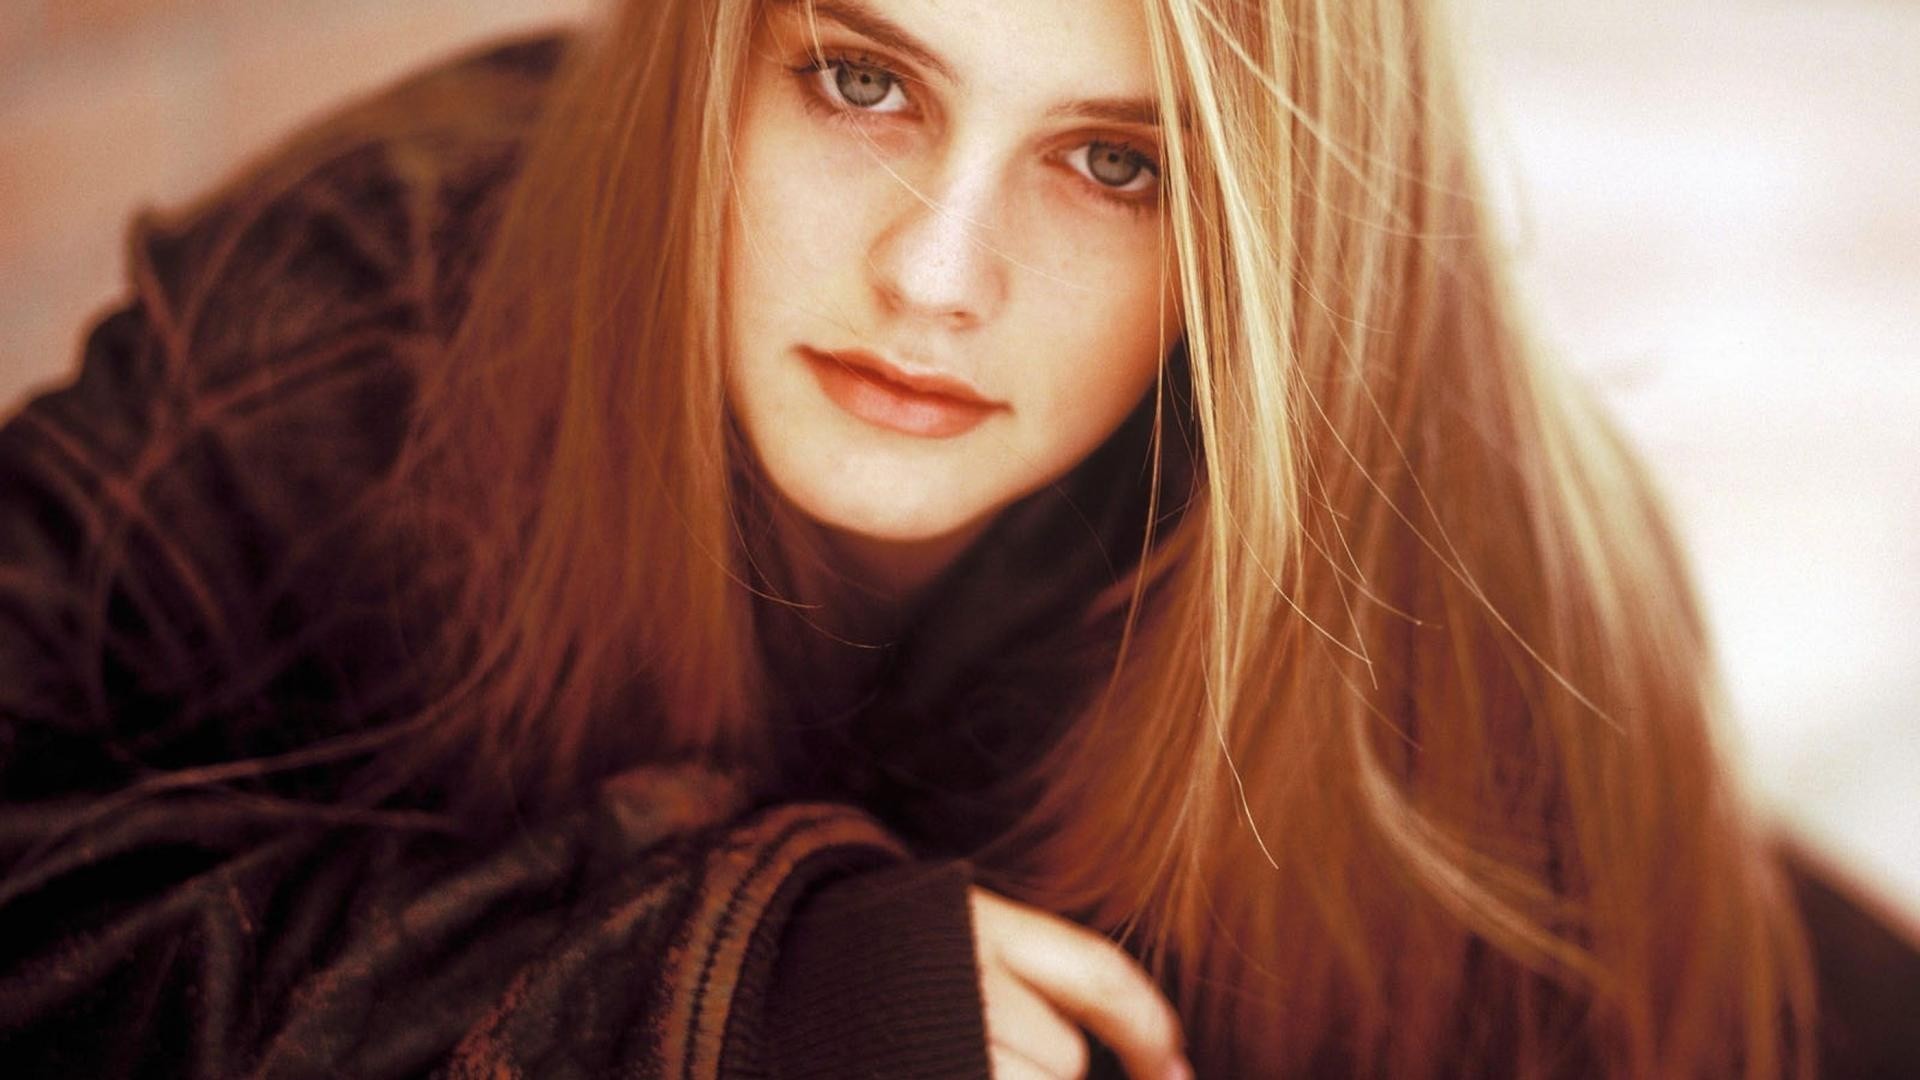 1920x1080, Related Wallpapers From Al Capone - 90's Alicia Silverstone Young - HD Wallpaper 